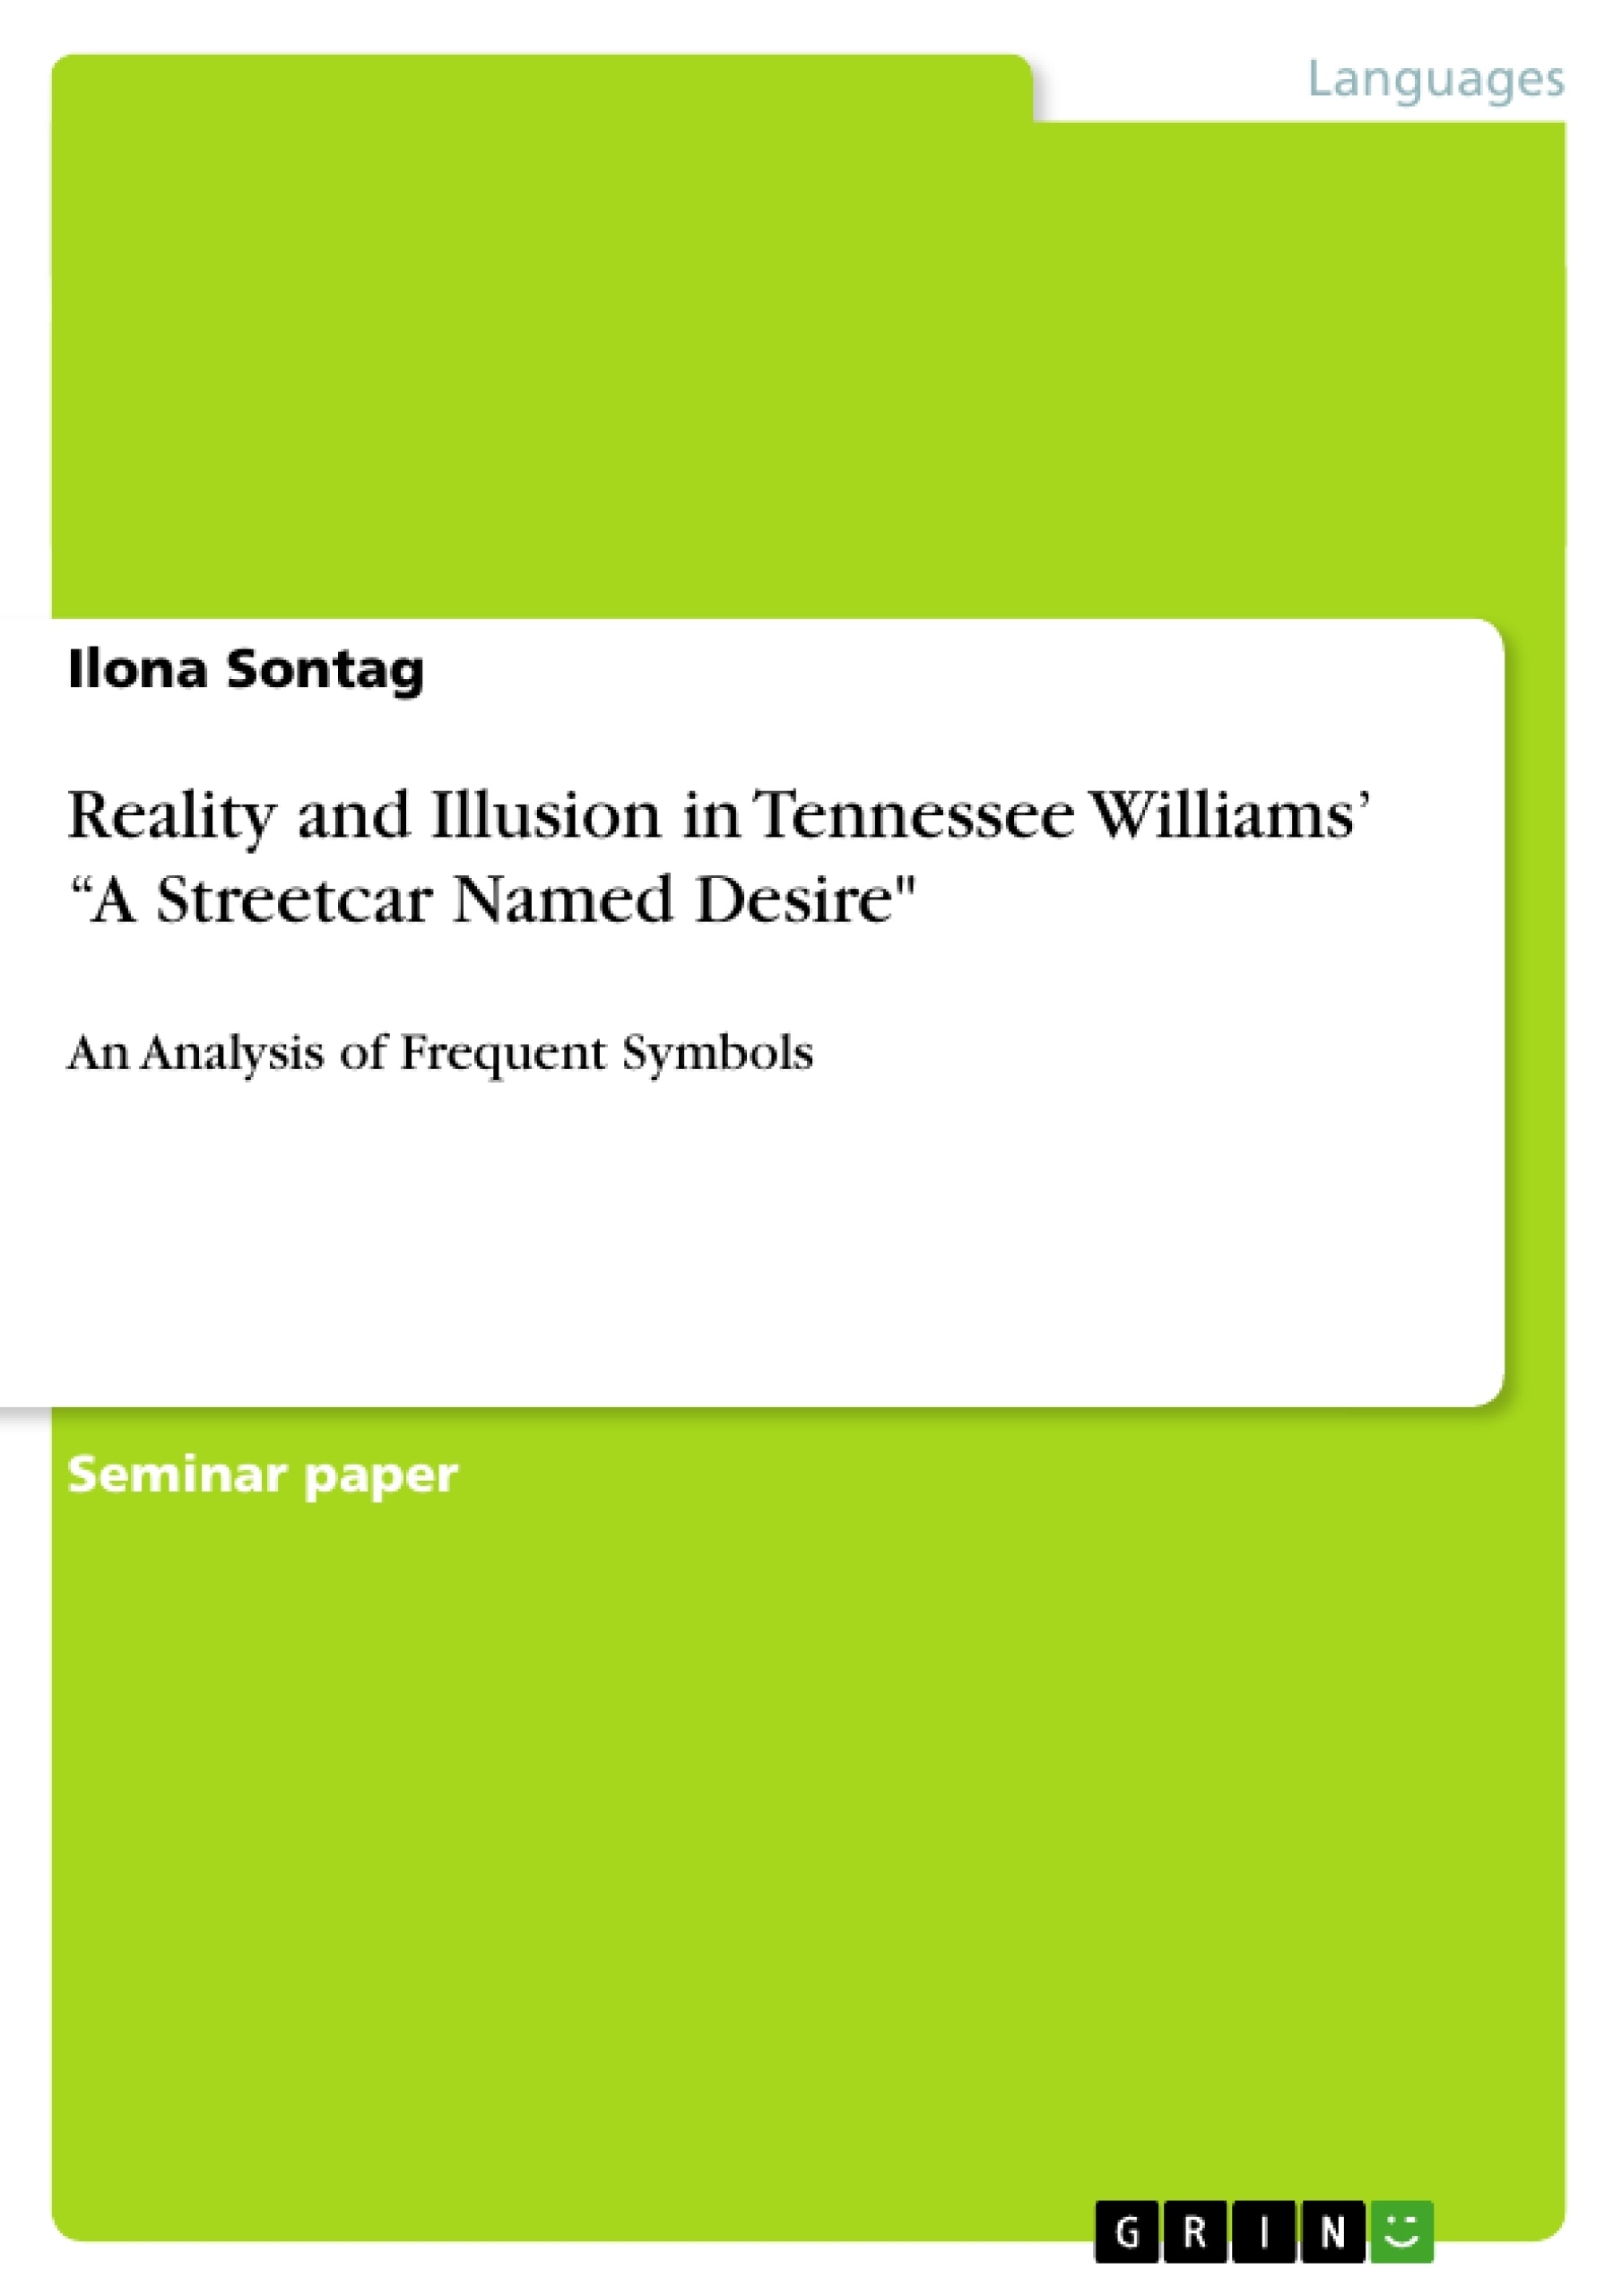 Title: Reality and Illusion in Tennessee Williams’ “A Streetcar Named Desire"